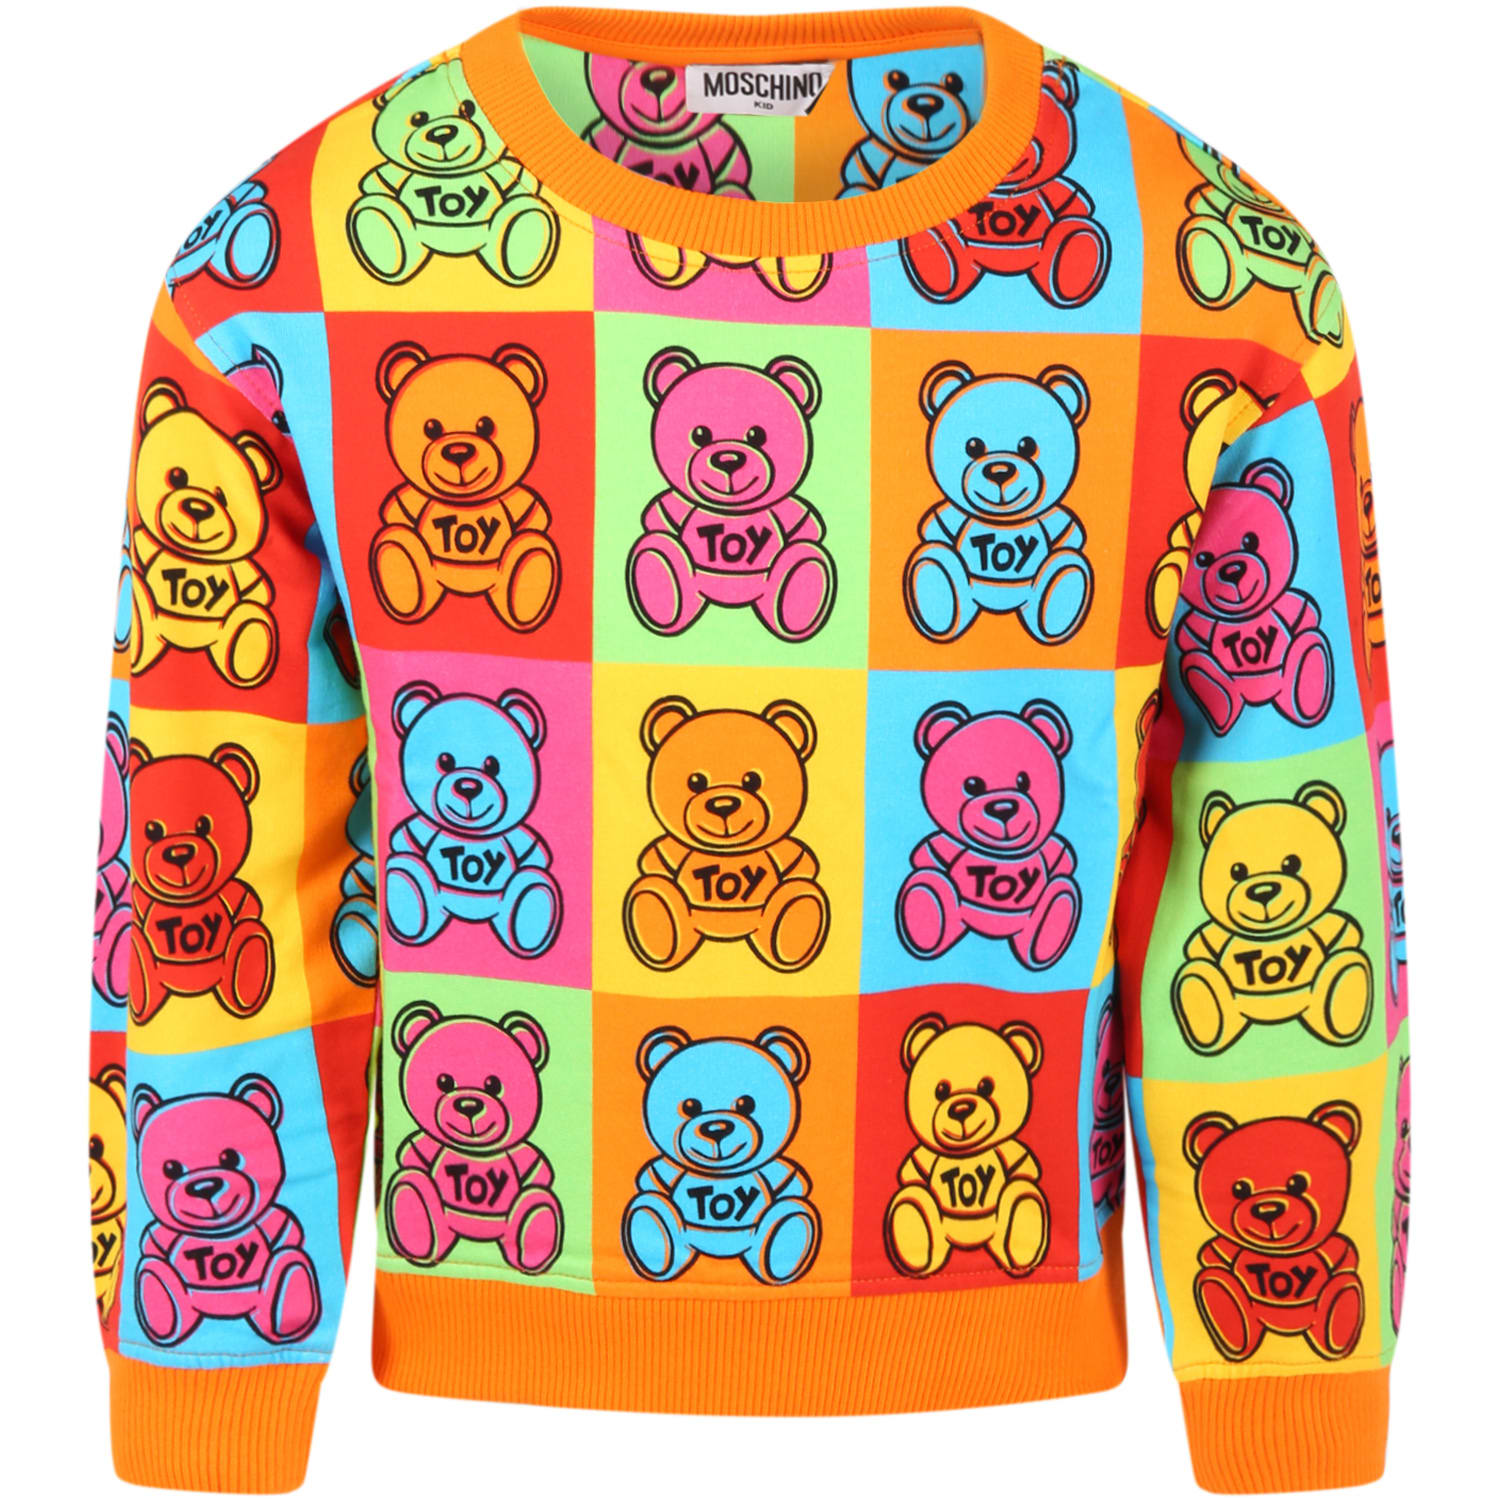 Moschino Multicolor Sweatshirt For Kids With Colorful Teddy Bear